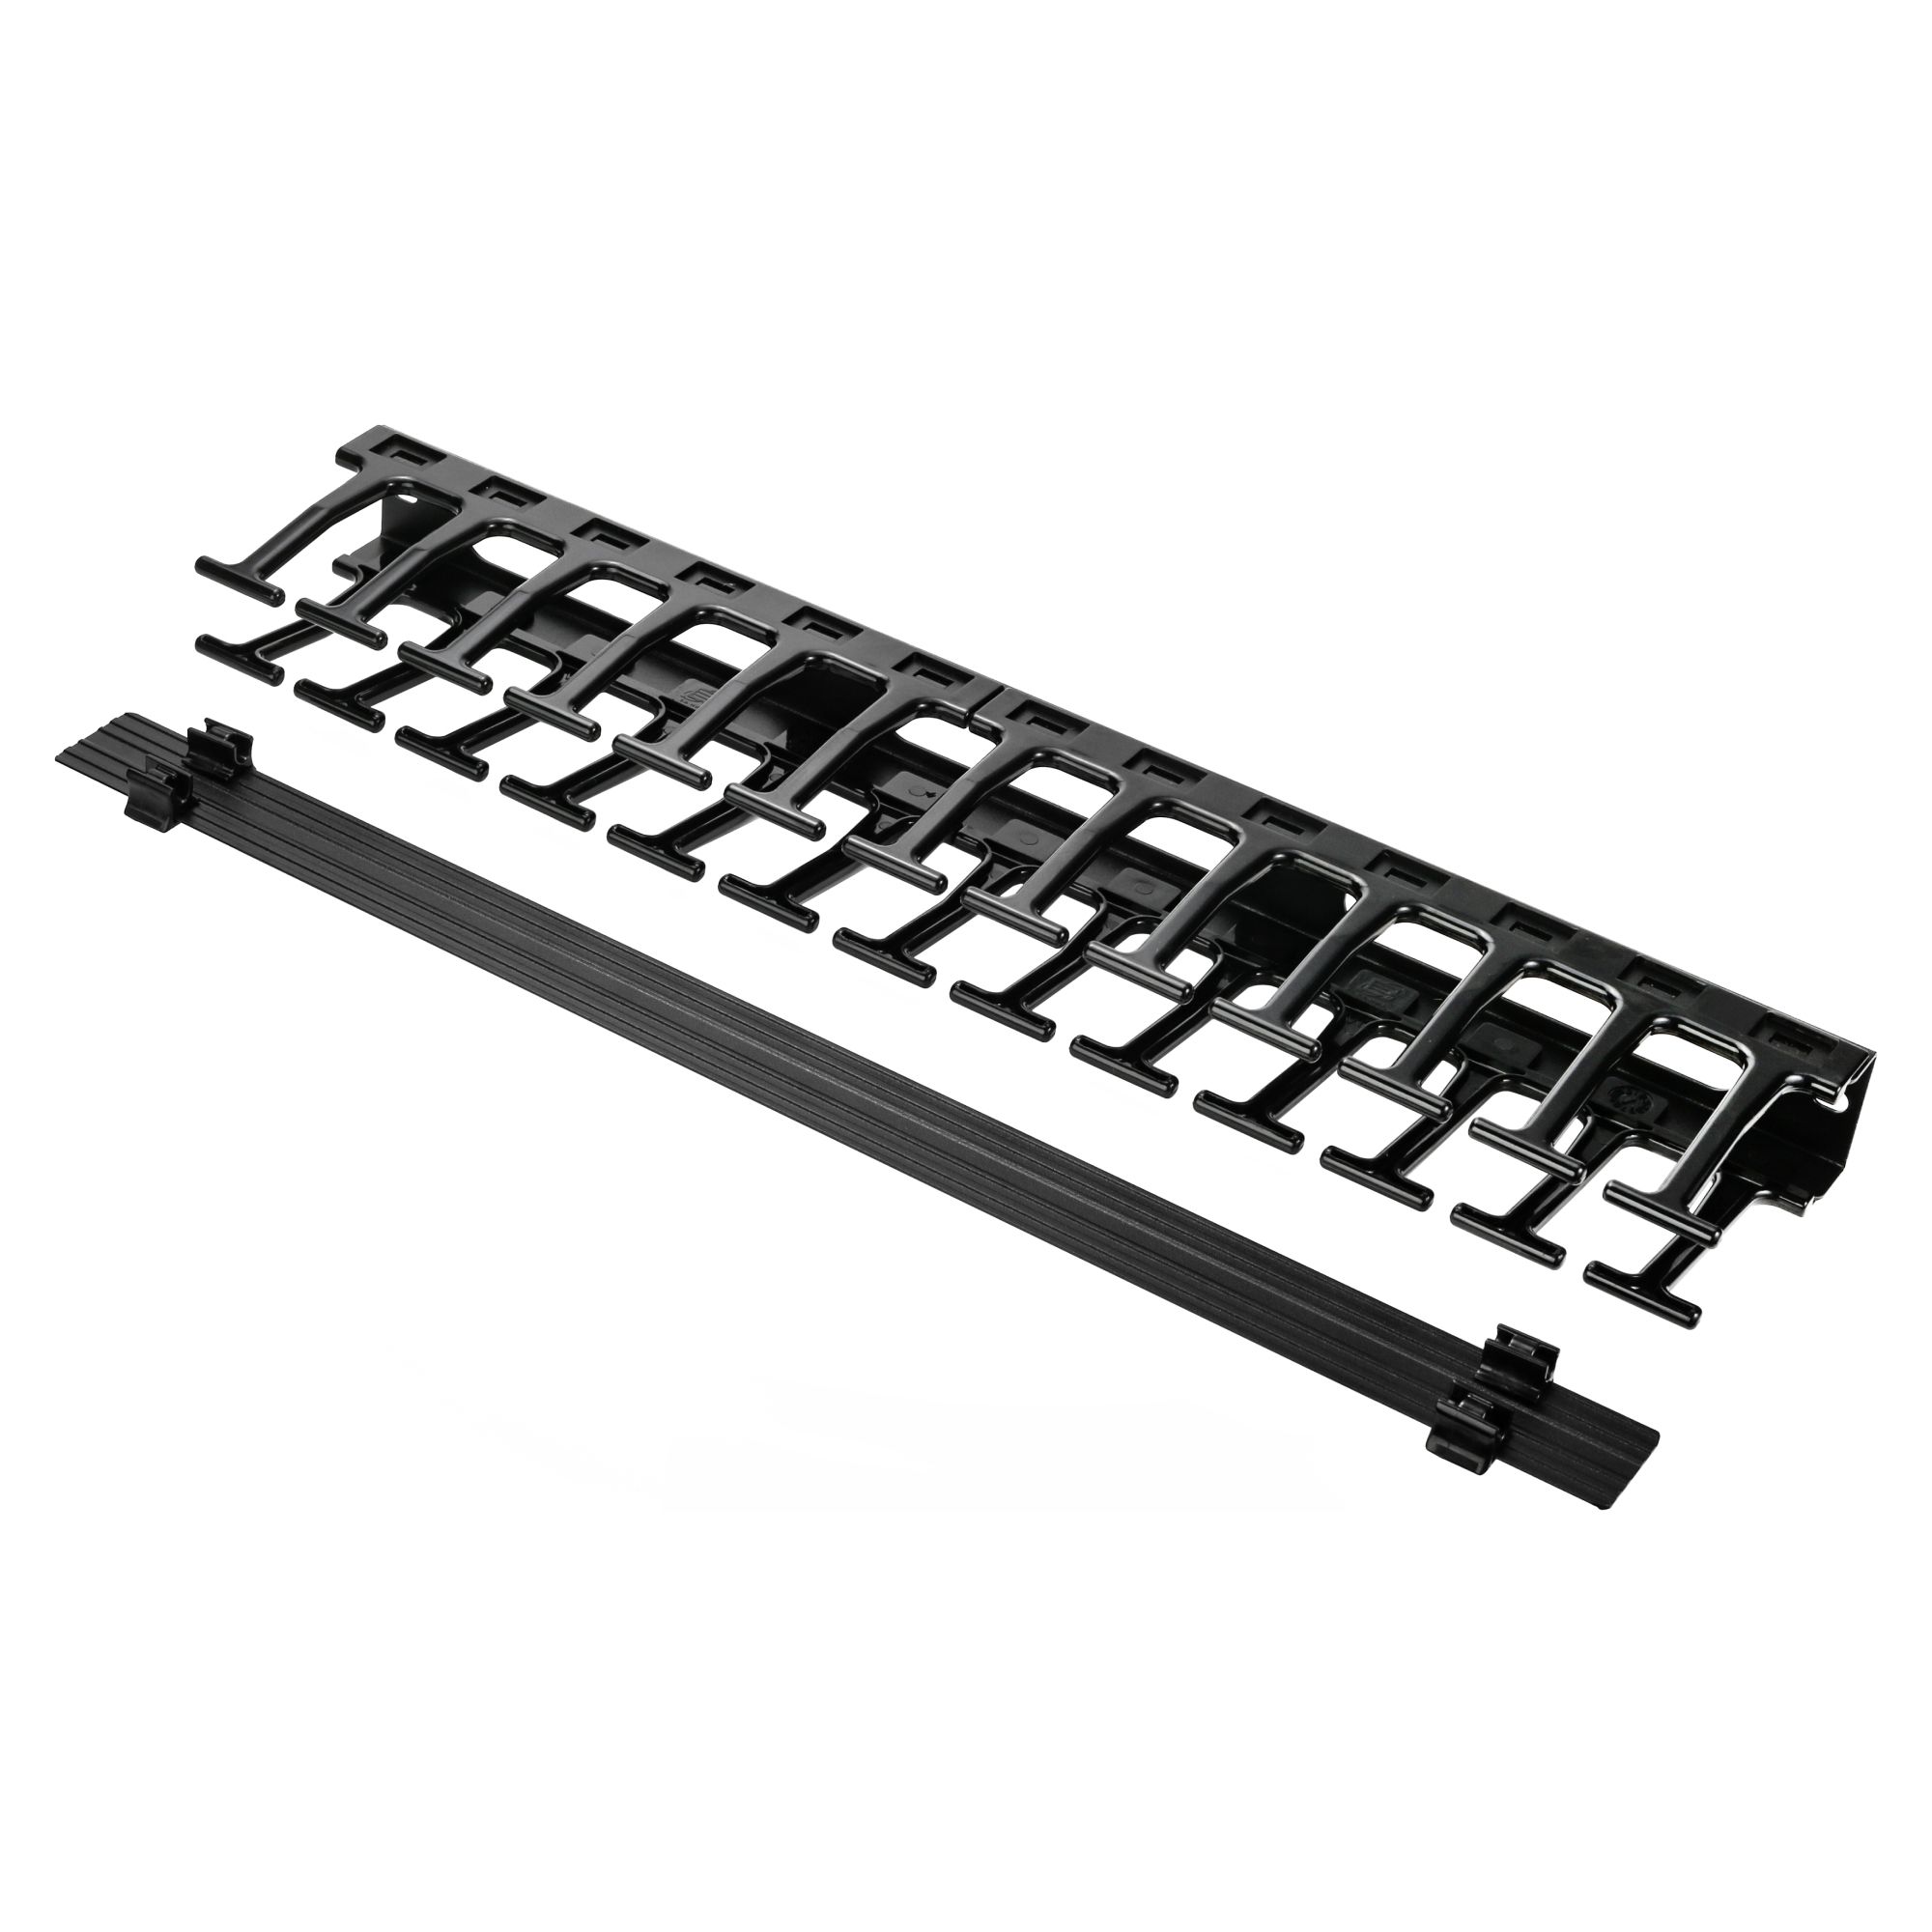 cable management tray, cable management rack, cable manager